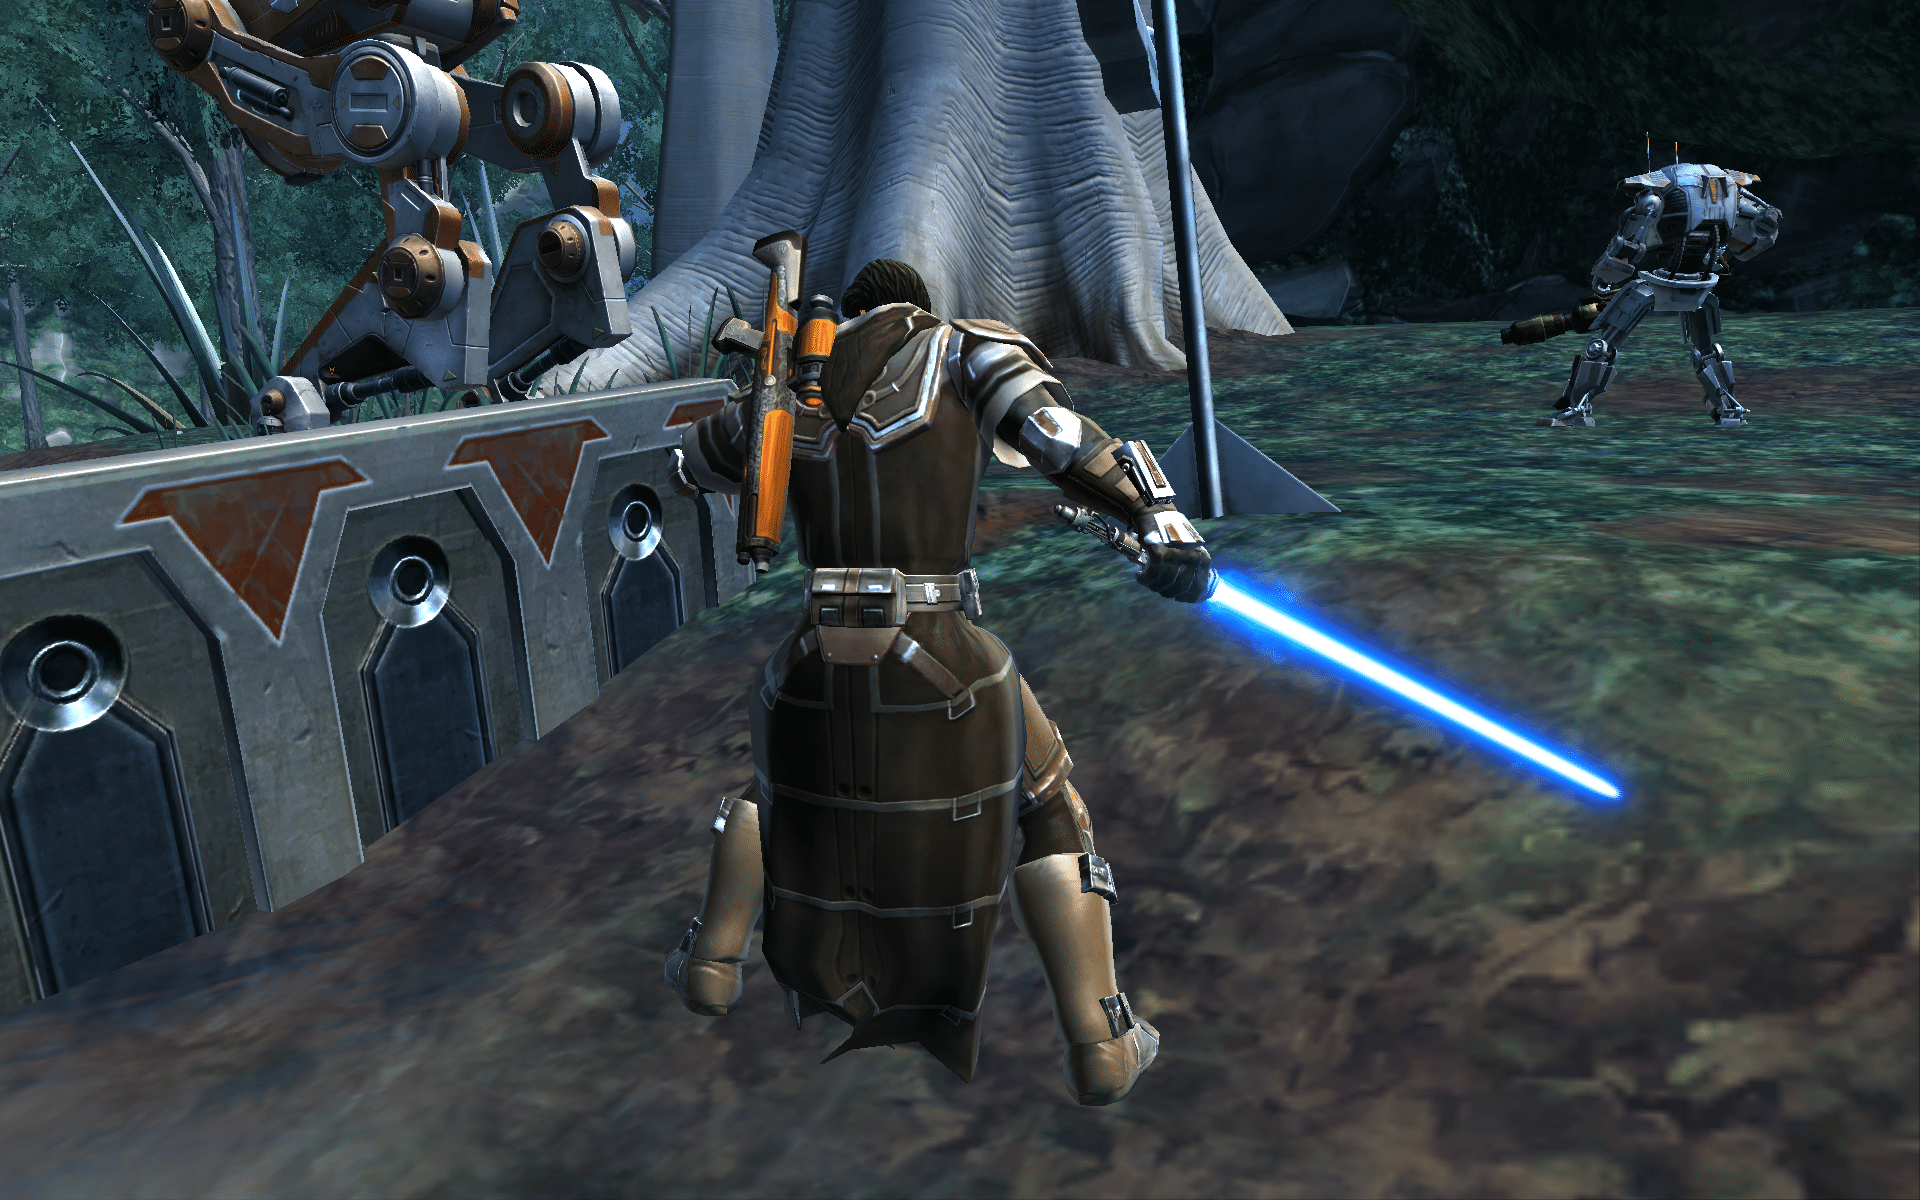 Jedi on Yavin IV have resorted to using uncivilized weapons it seems